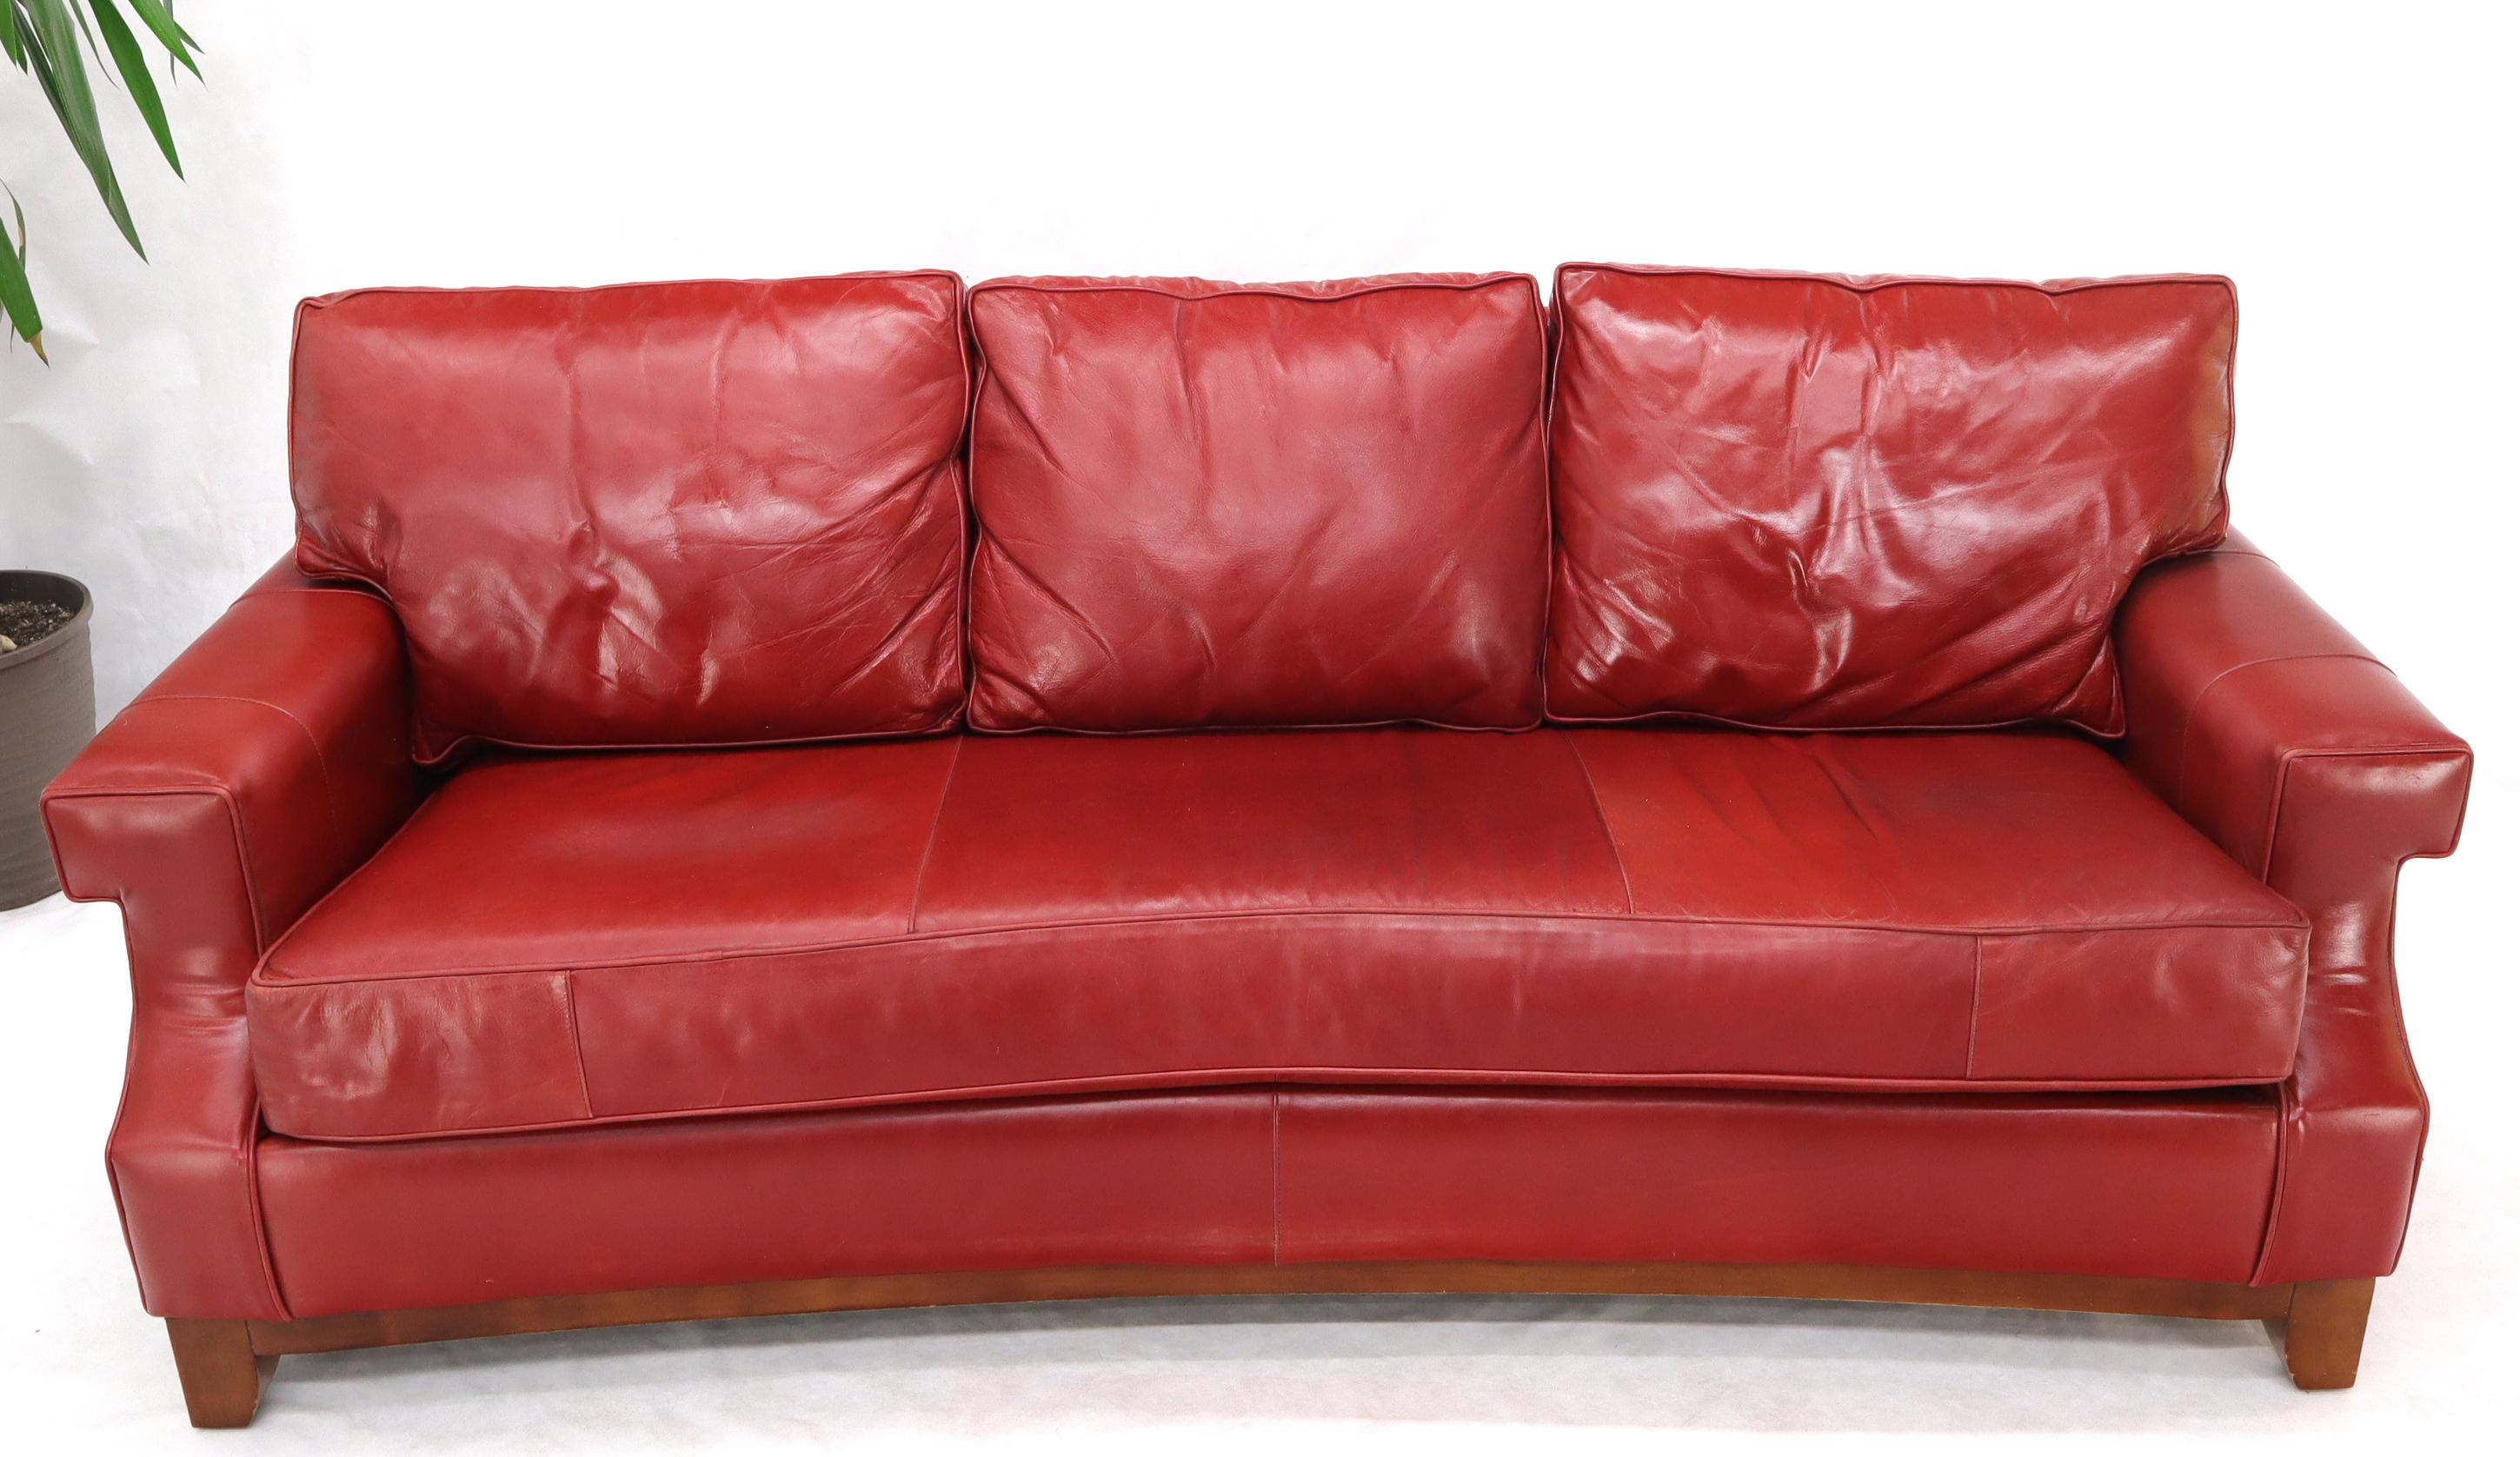 High quality red leather upholstery sofa by Thomasville.